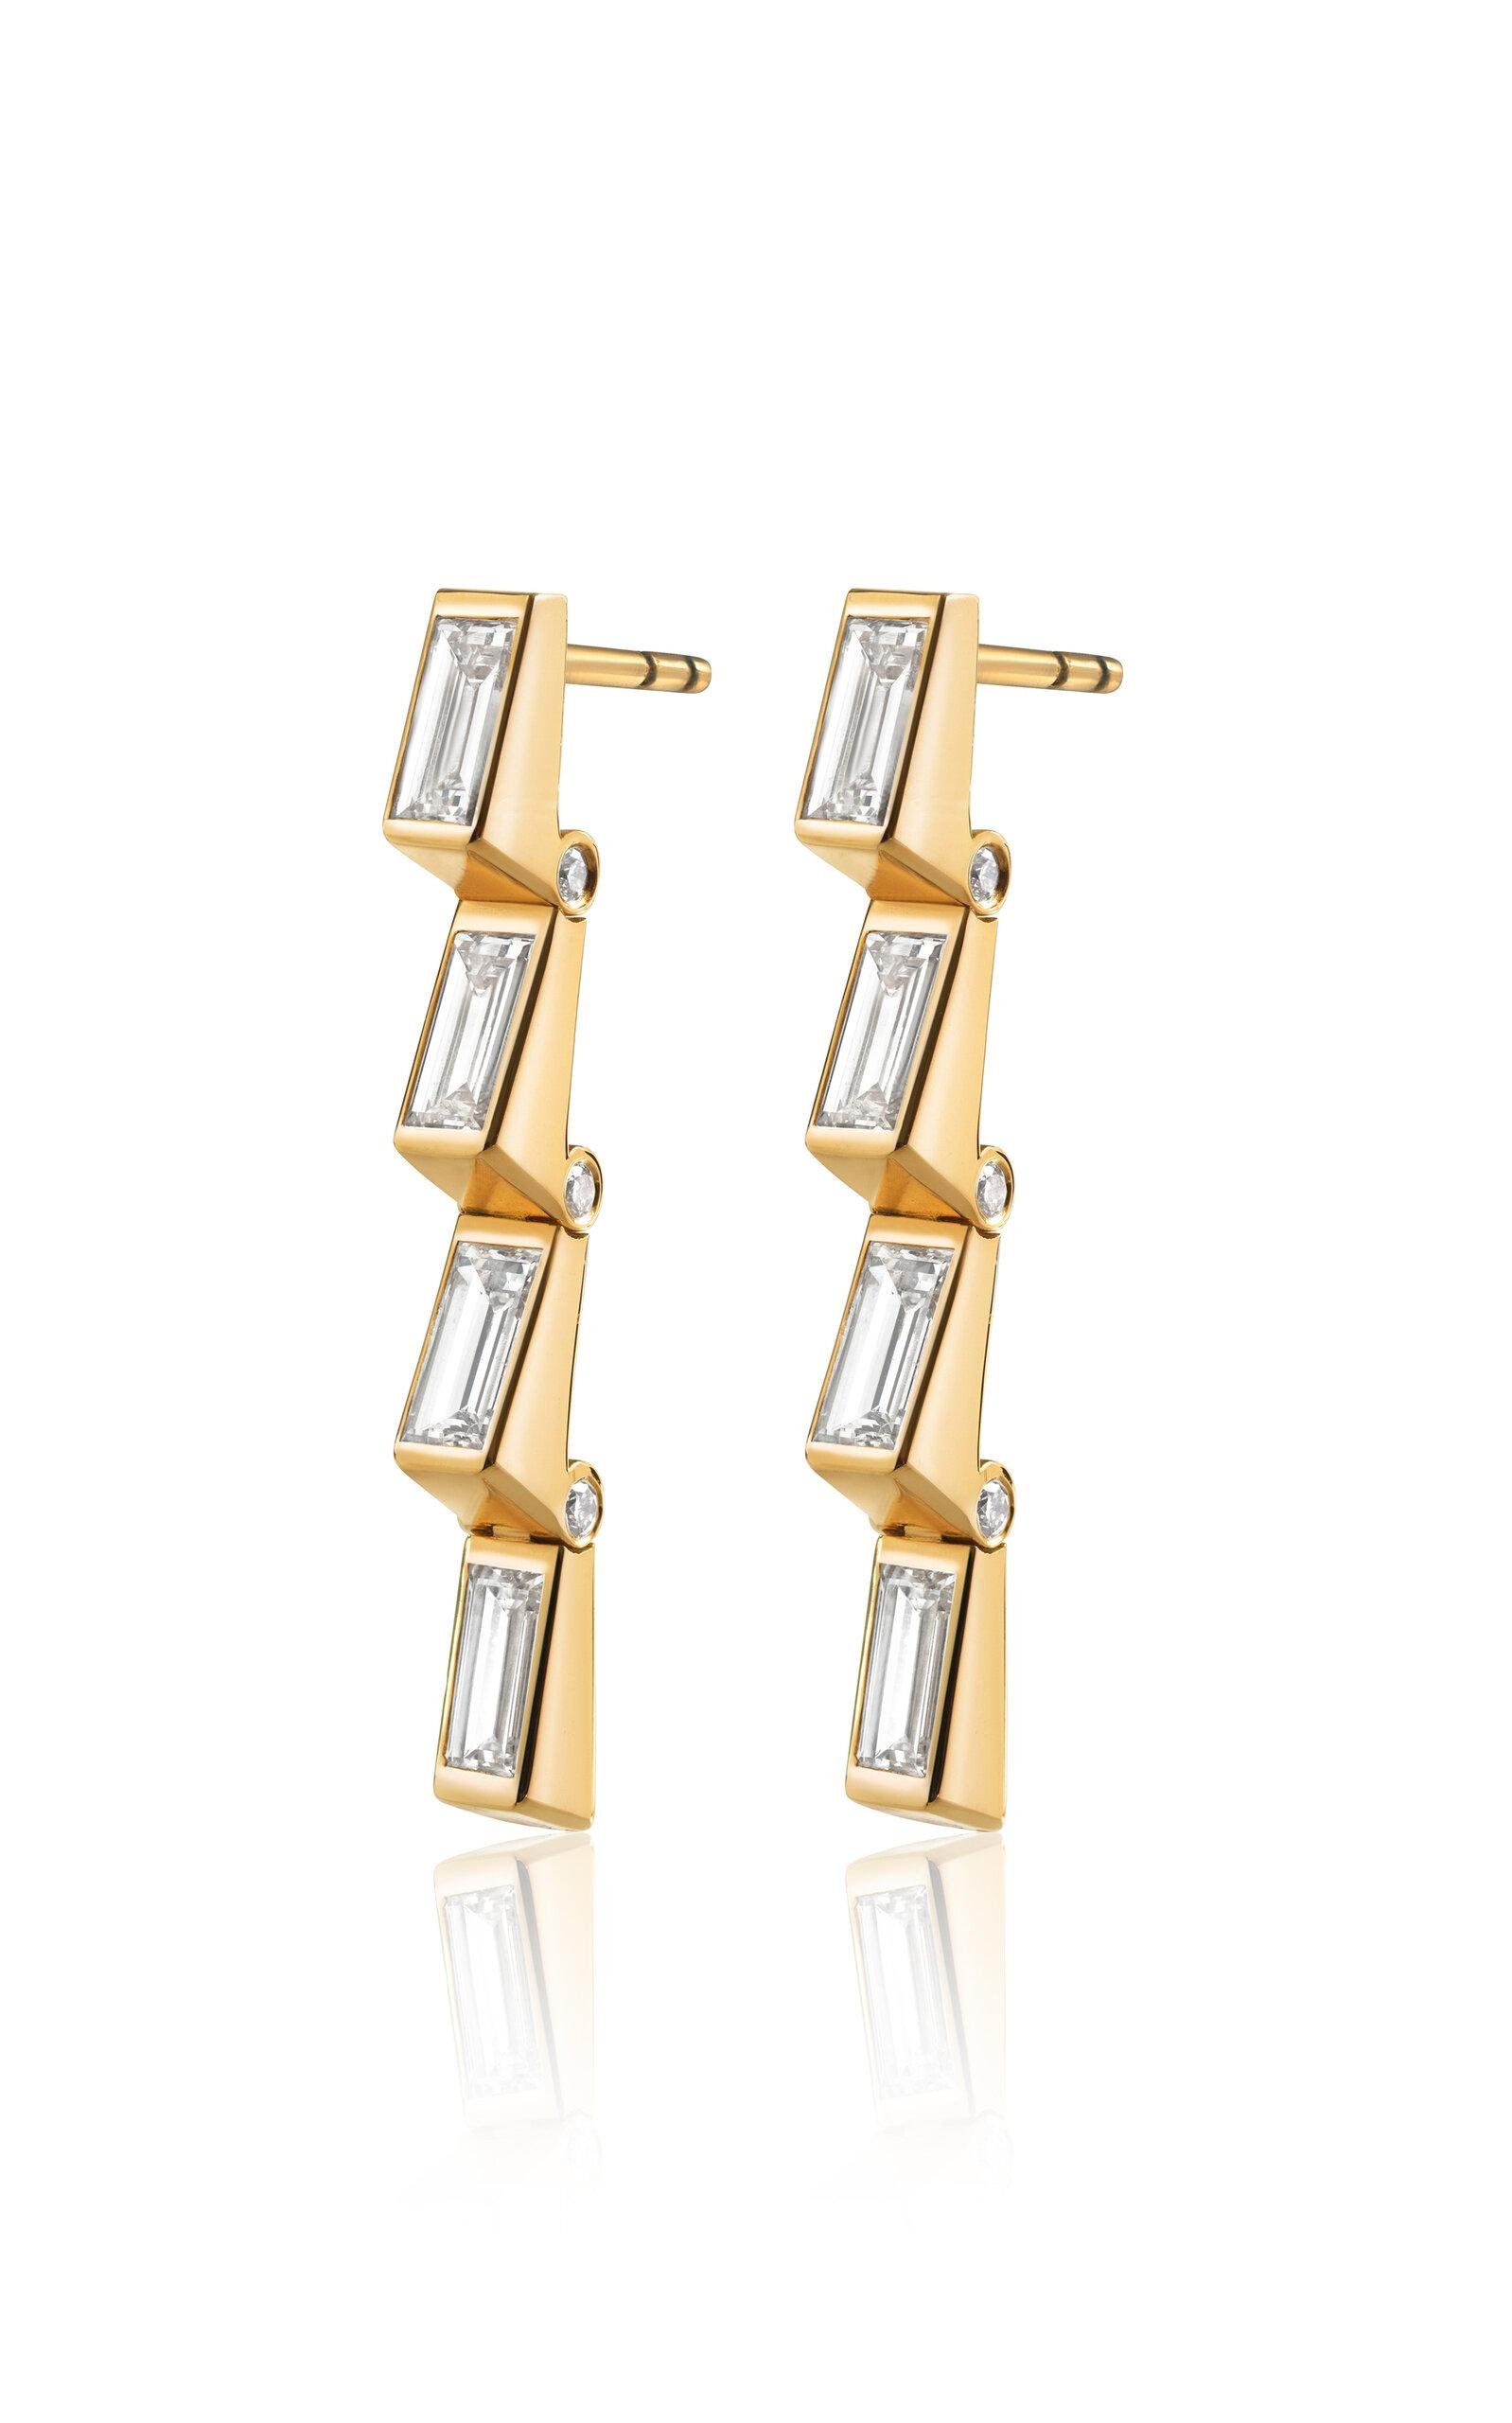 Erede - 18k Yellow Gold Hinged Four Drop Earrings - Gold - OS - Only At Moda Operandi - Gifts For Her by EREDE